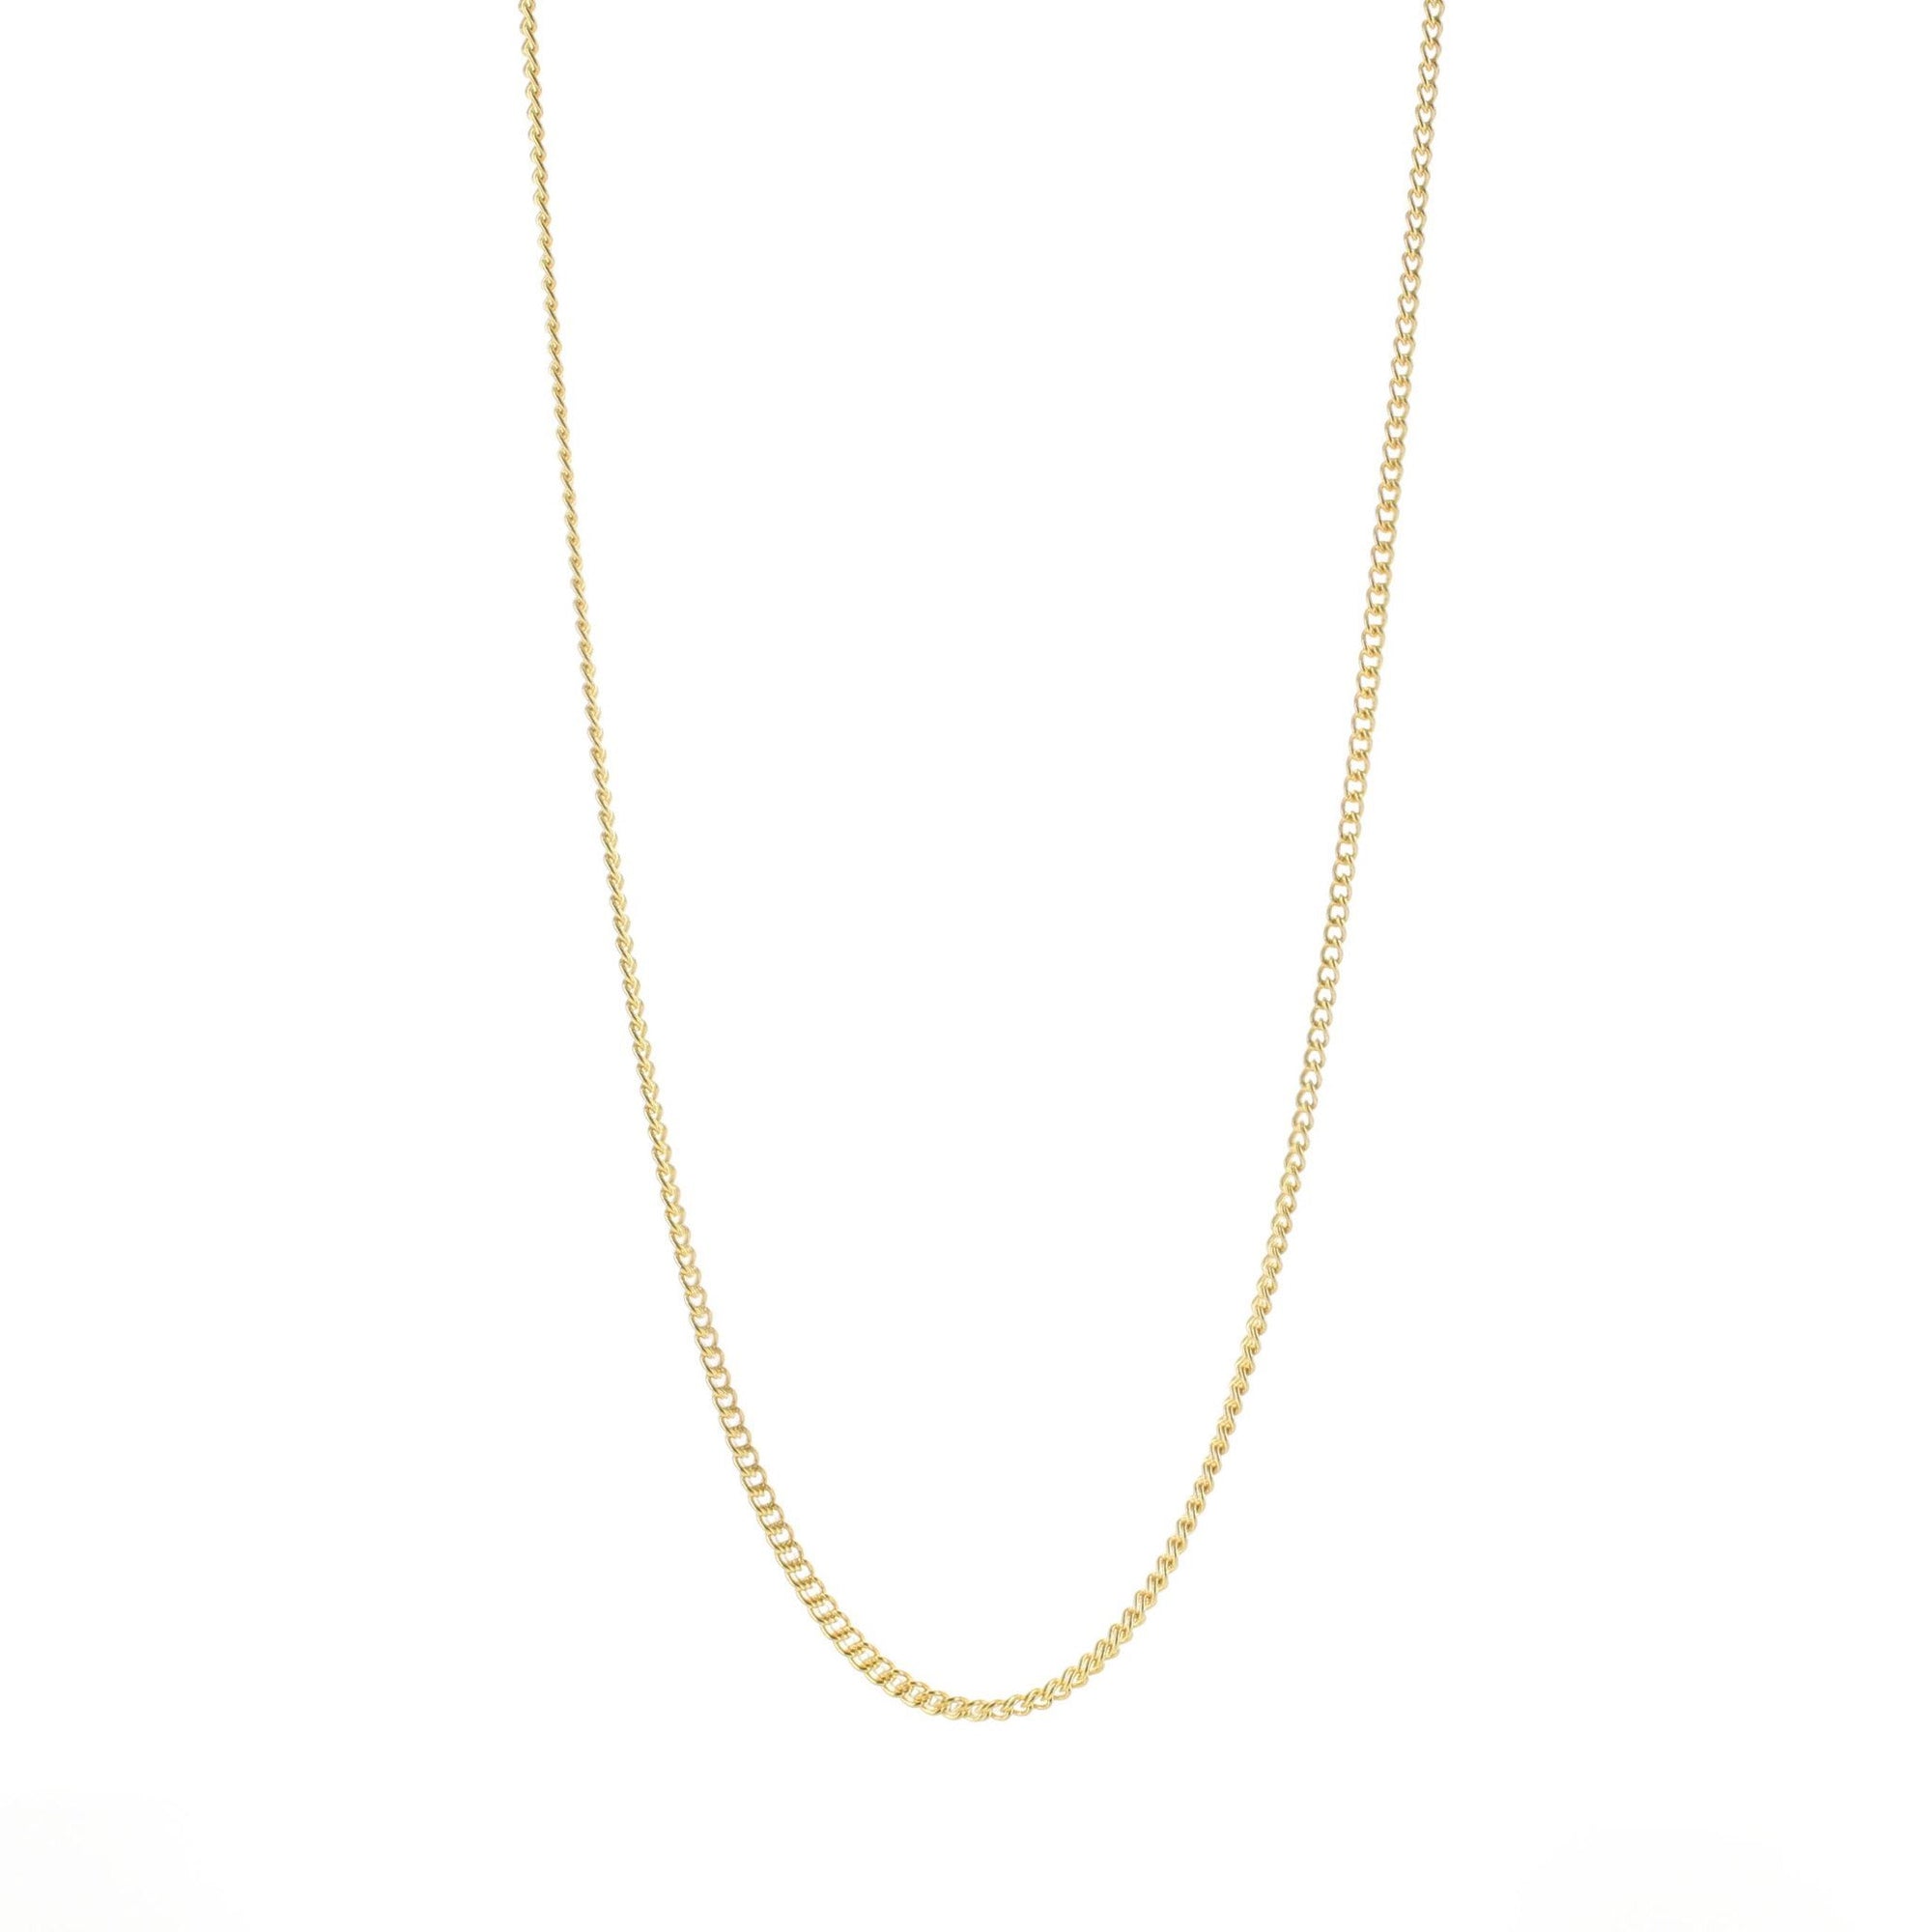 CHARMING 28-30" NECKLACE GOLD - SO PRETTY CARA COTTER